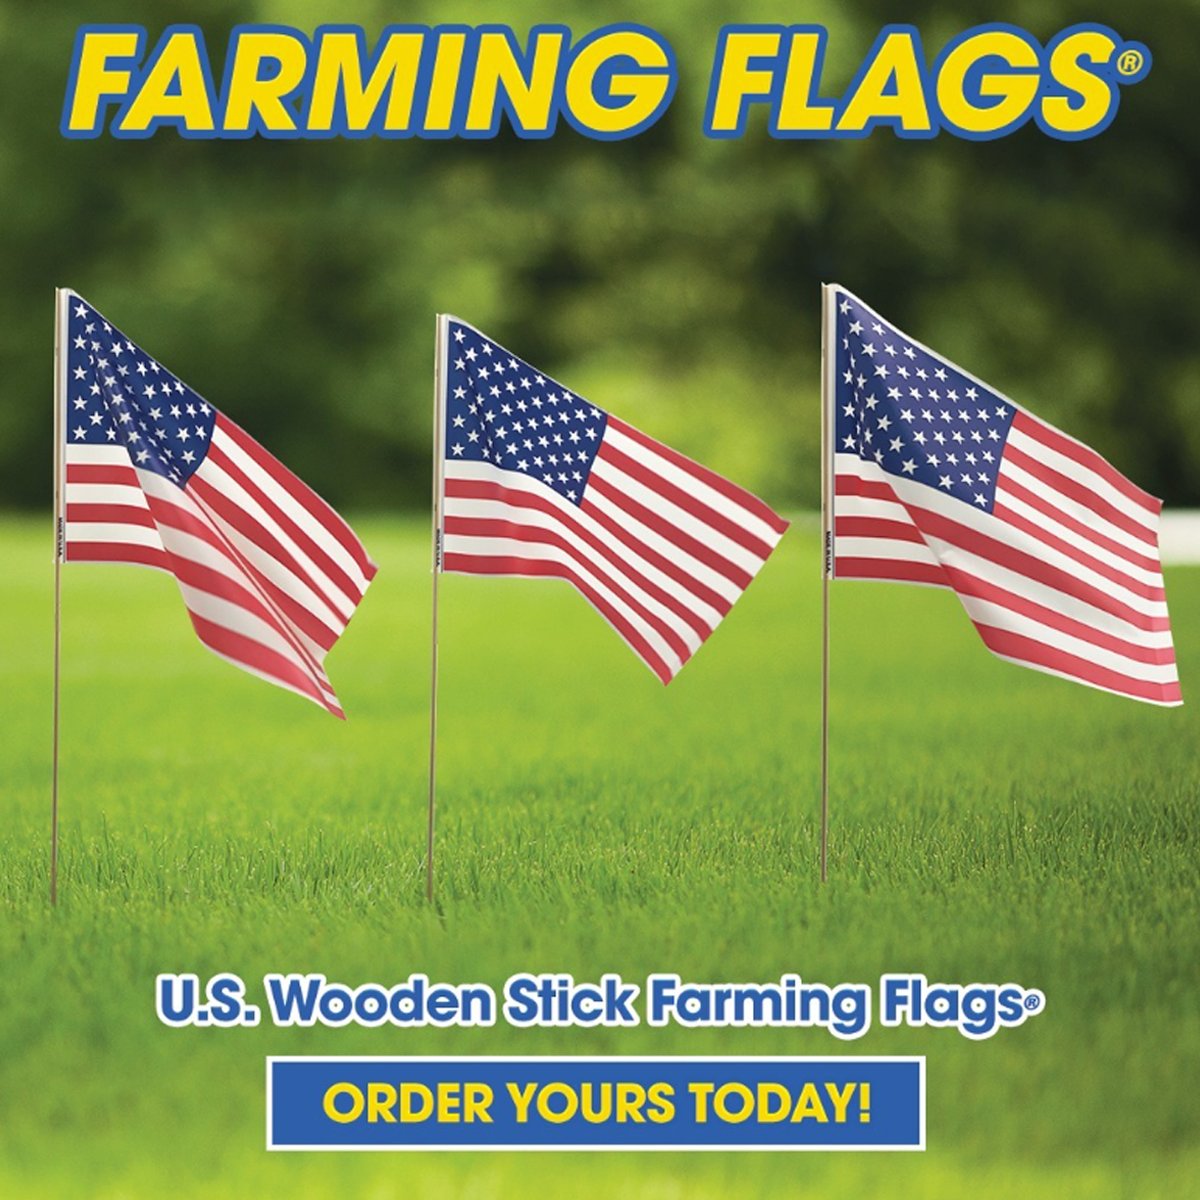 Farming flags are a great way to show your patriotism and sell a house! 

#farmingflag #realtor #sellingahouse